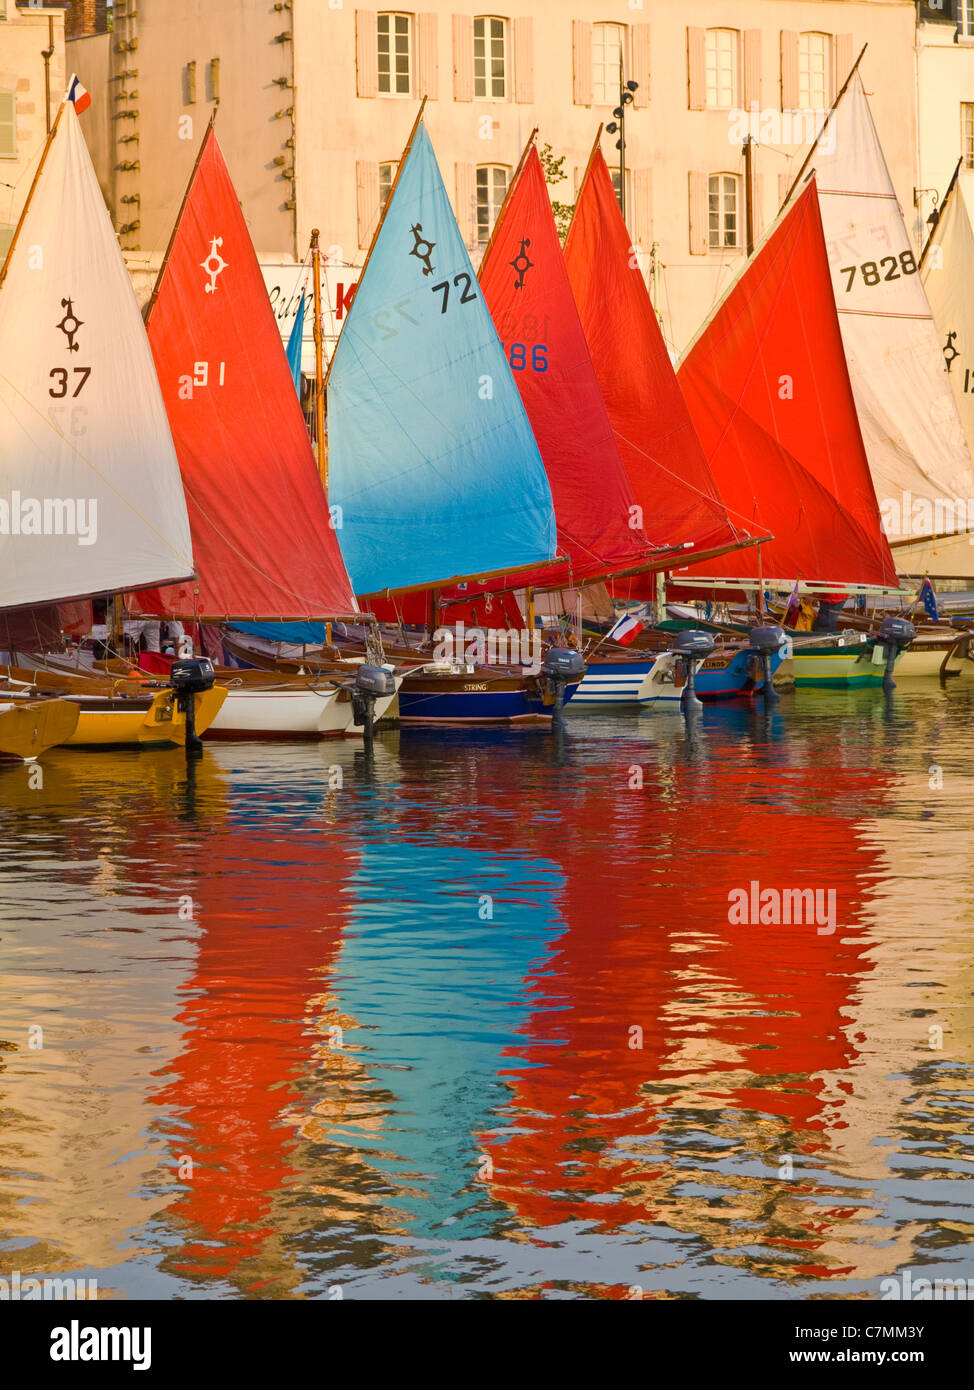 Old sail boats at the port of Vannes, Sea Festival, Bay of Morbihan, Brittany, France, Europe Stock Photo